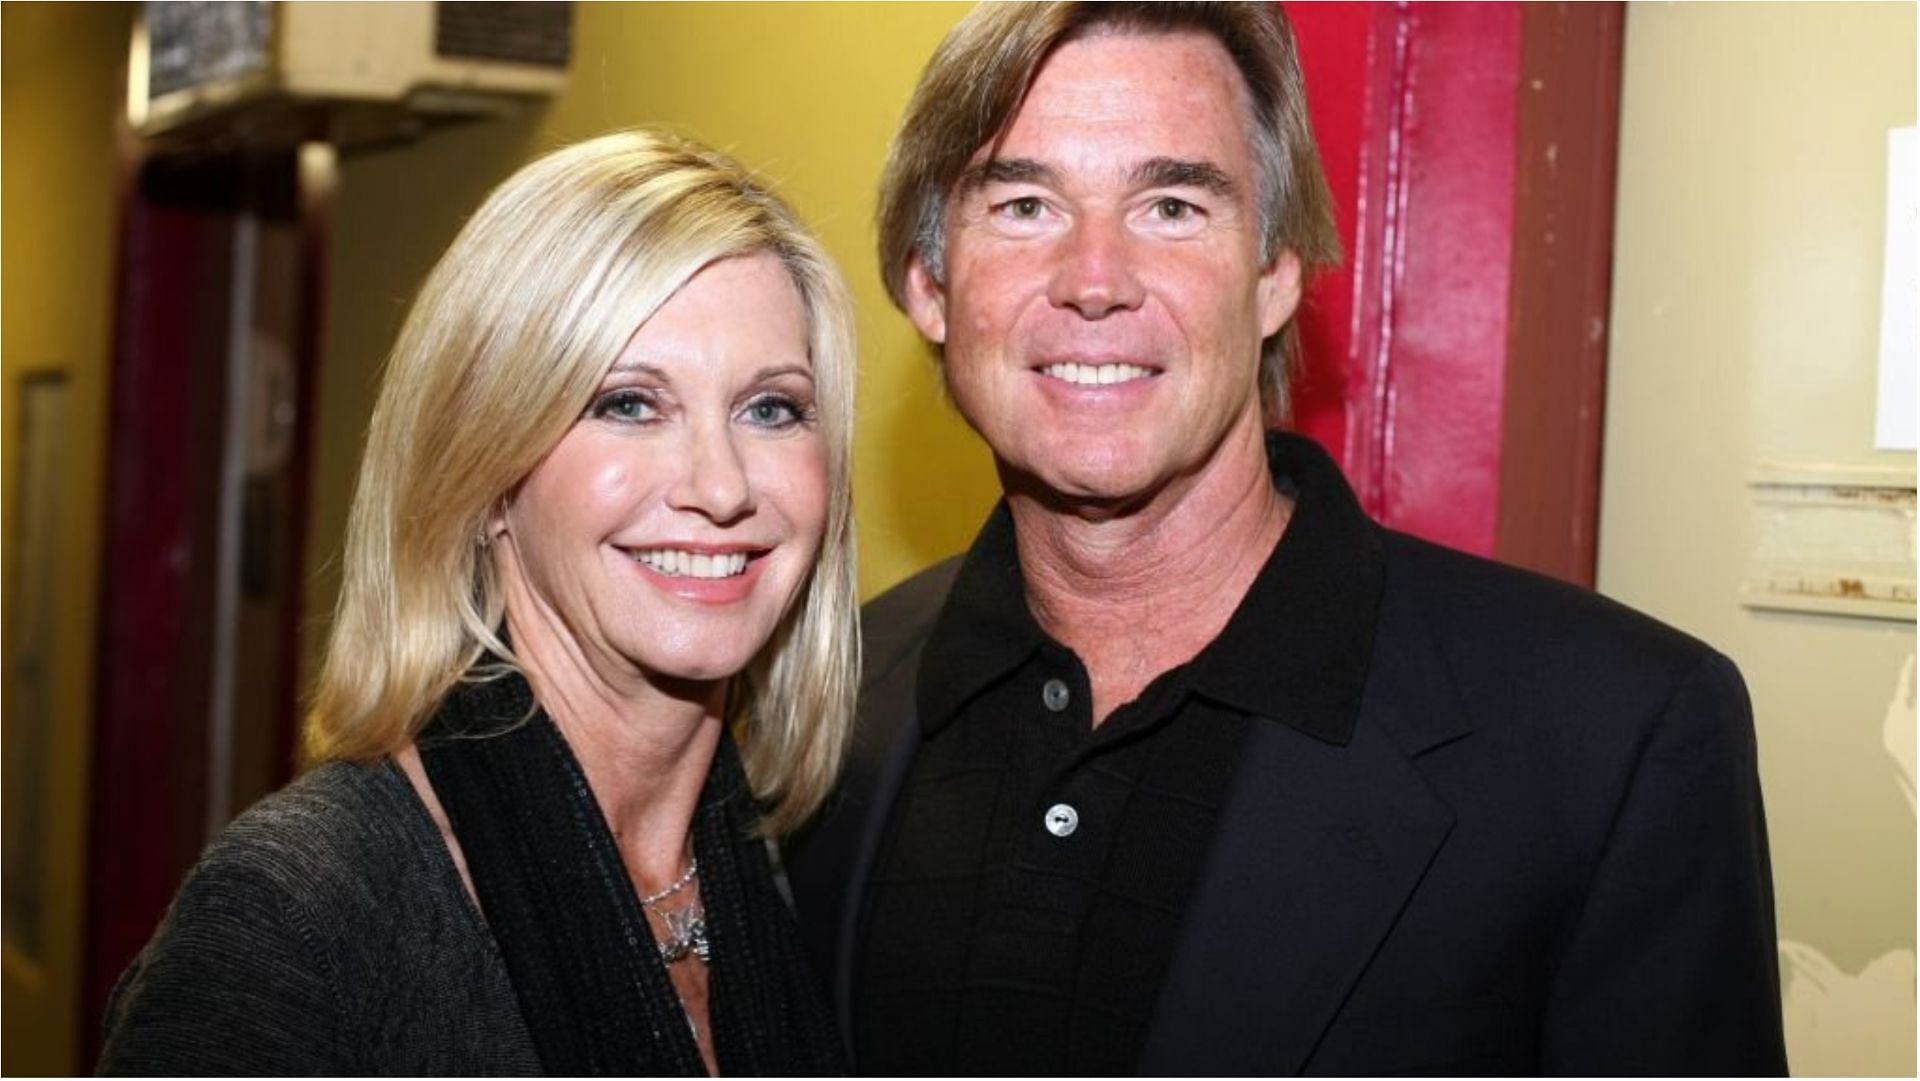 John Easterling addressed about his engagement to Olivia Newton-John (Image via Jim Steinfeldt/Getty Images)